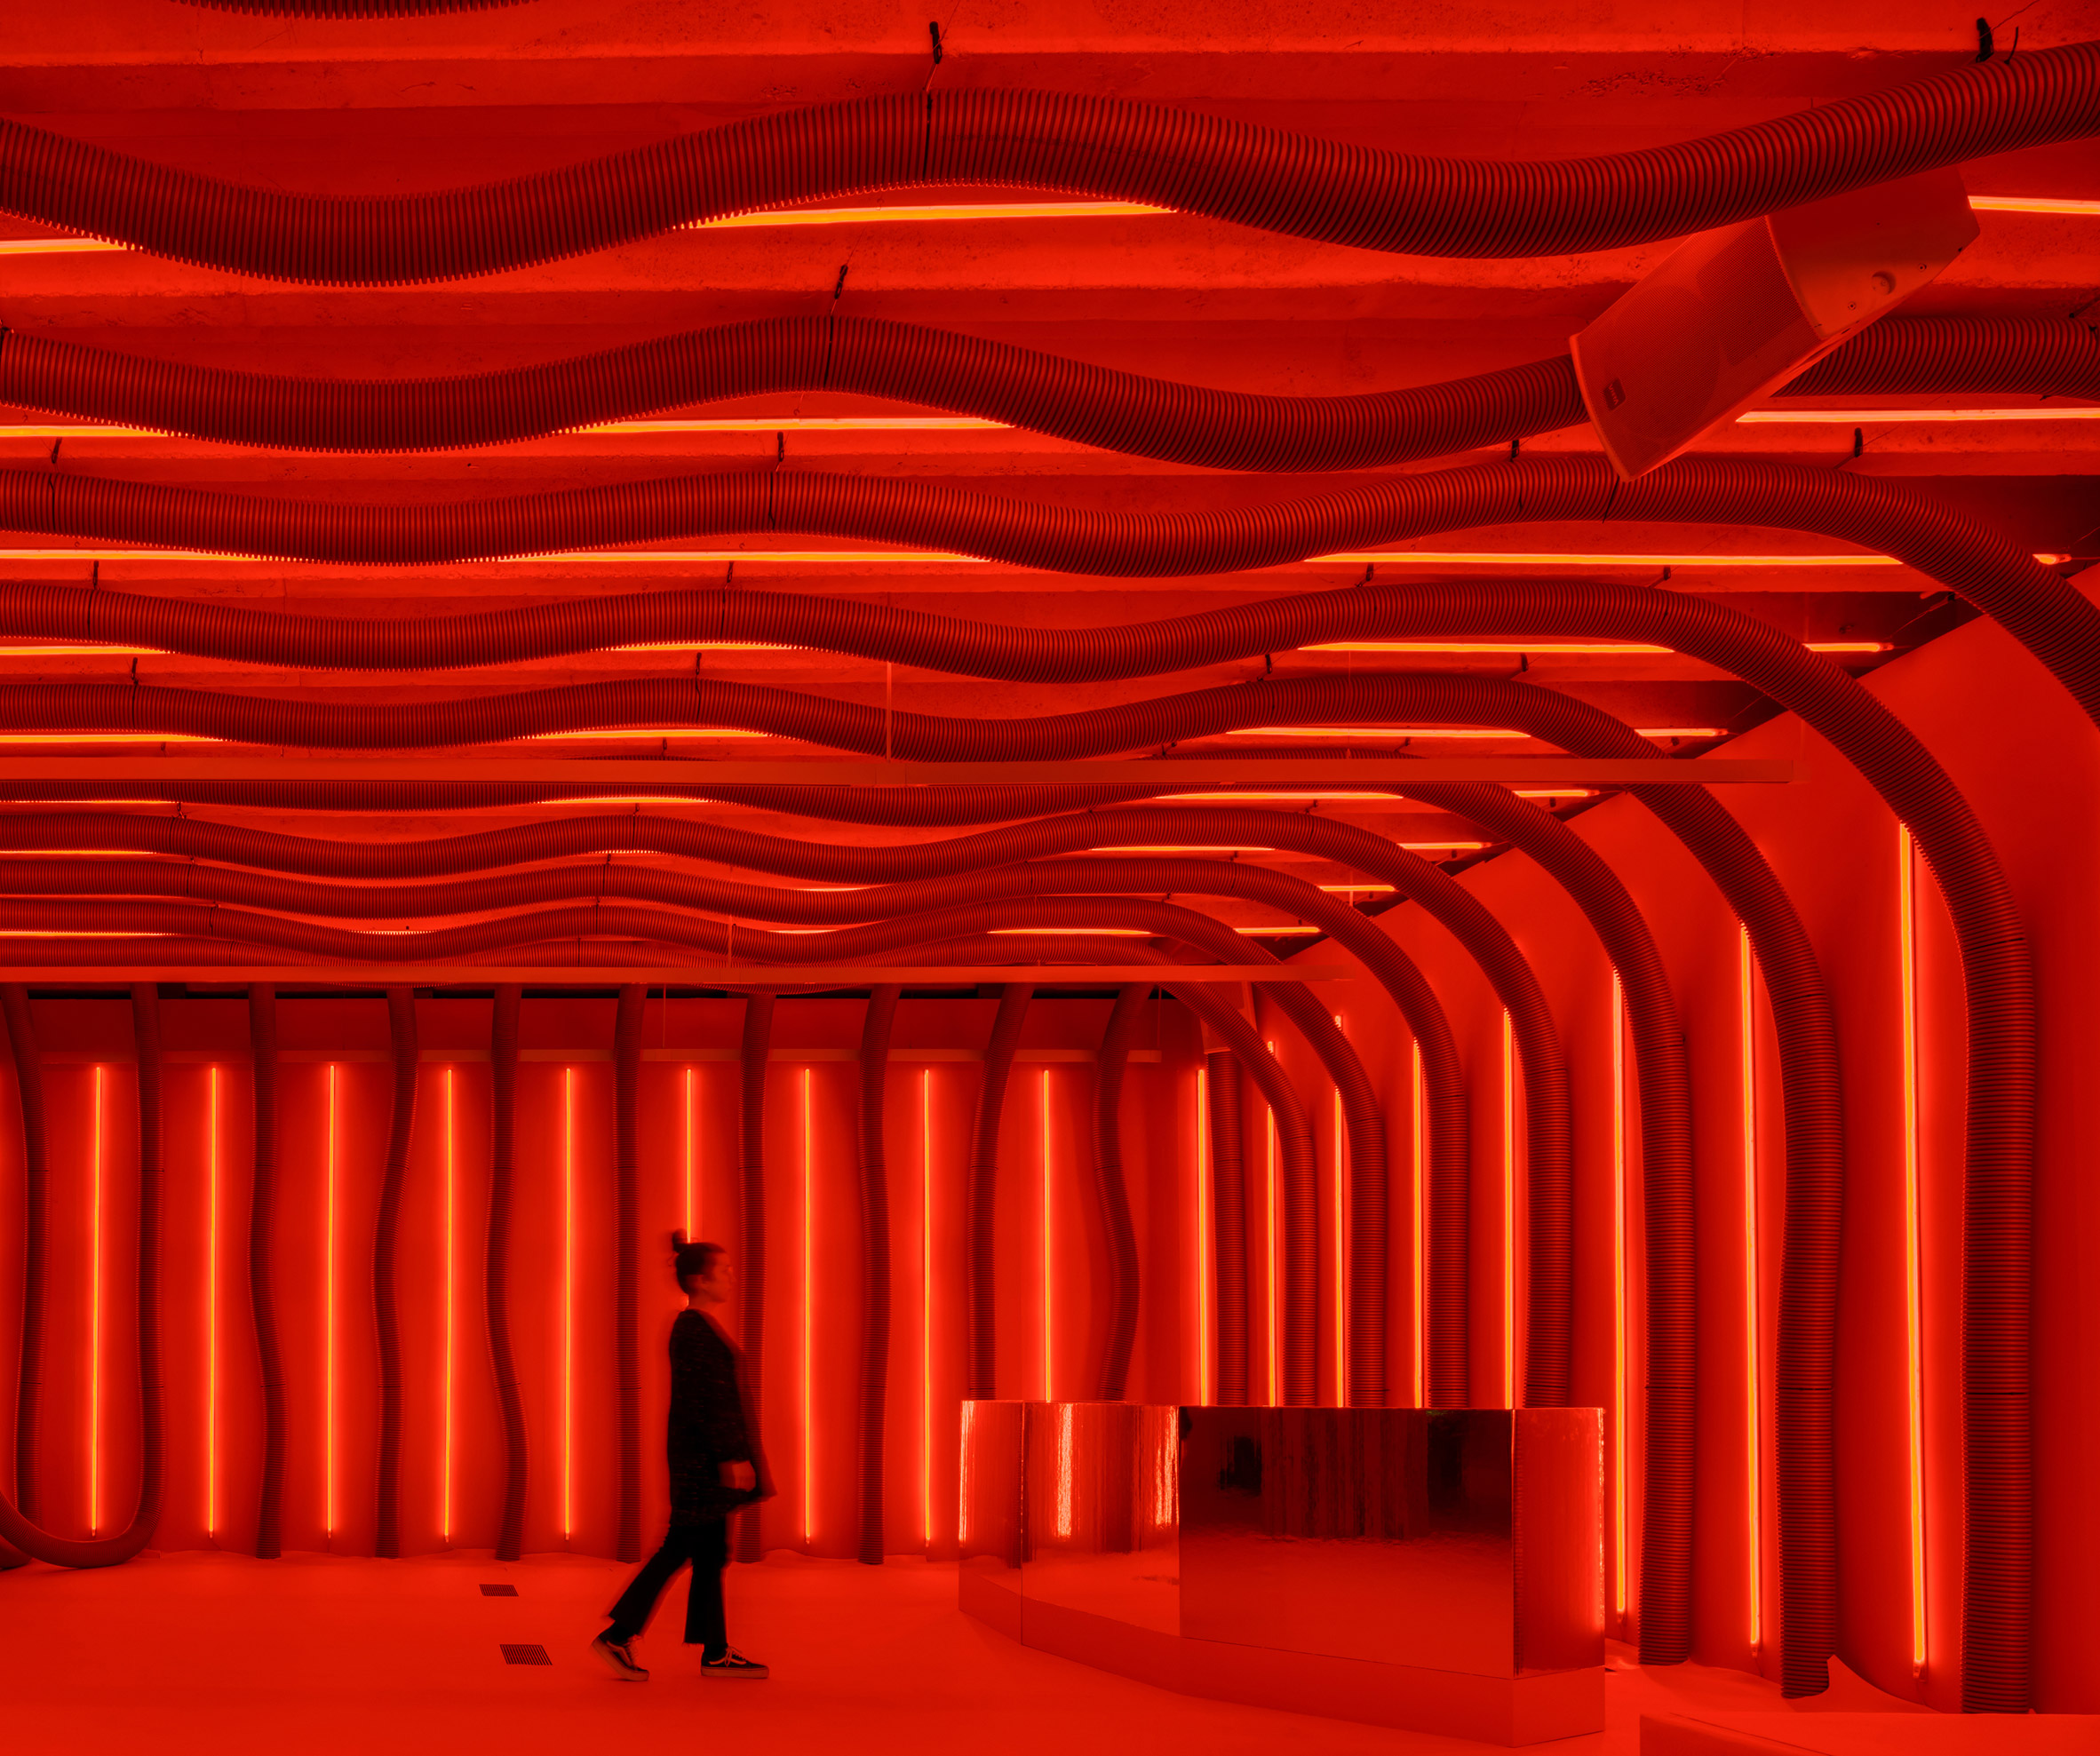 Pareid "Drown" Humans in an Installation Full of Red-Like Organs